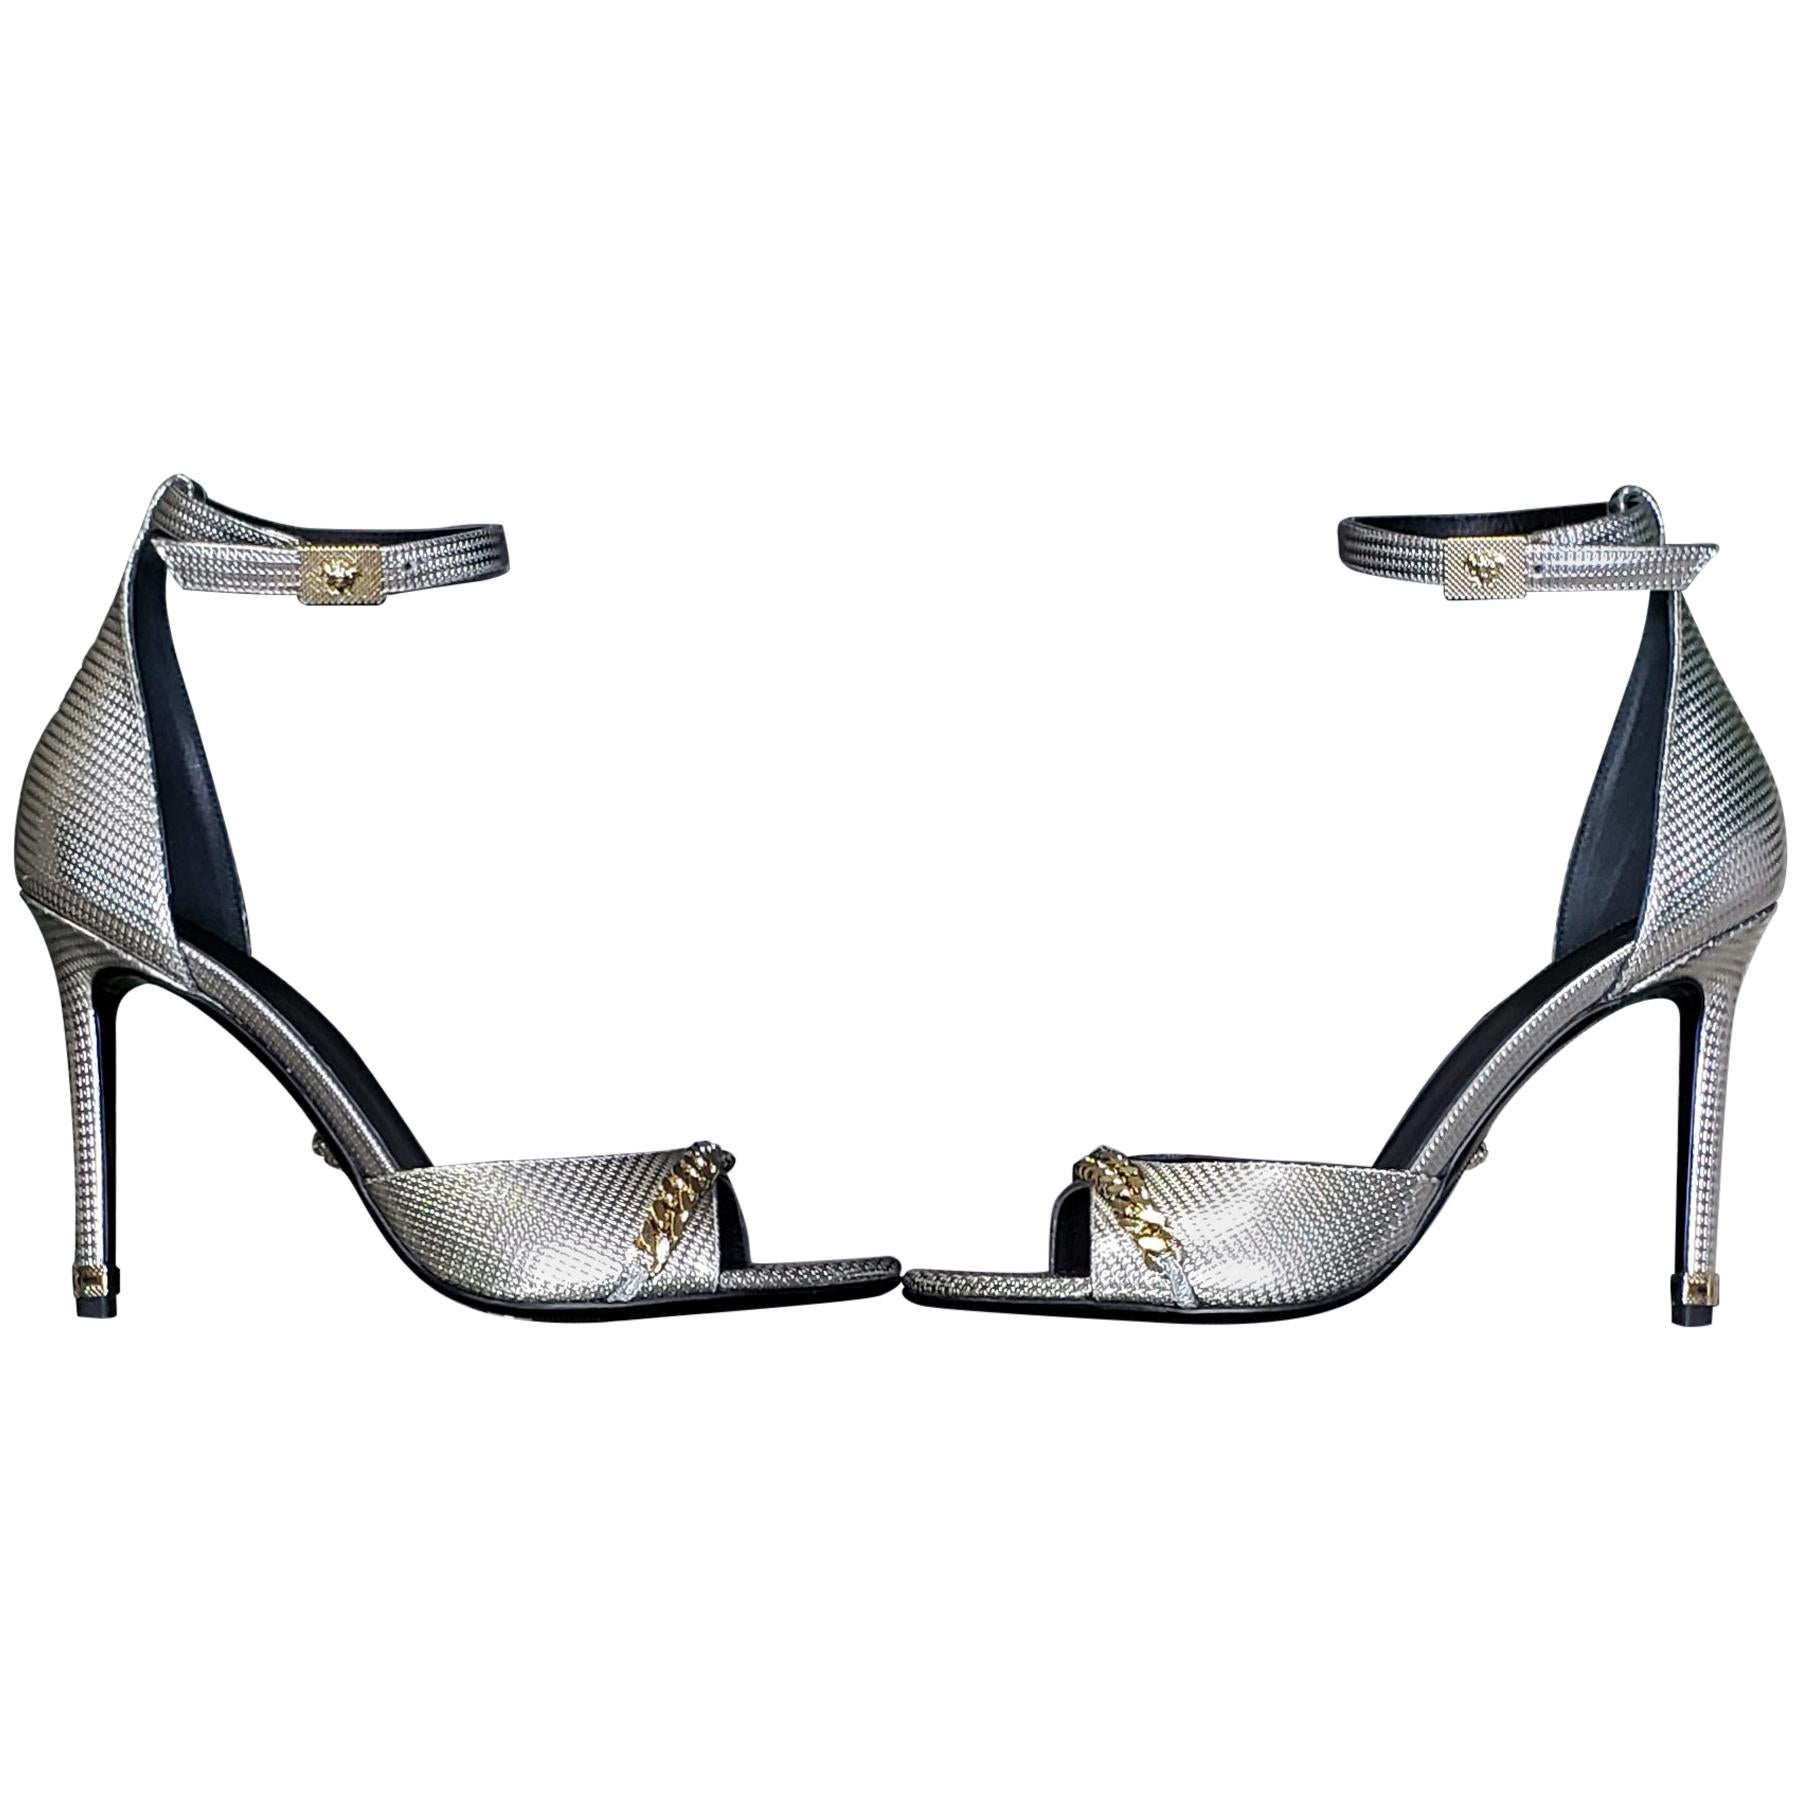 VERSACE SILVER LEATHER SANDALS SHOES 